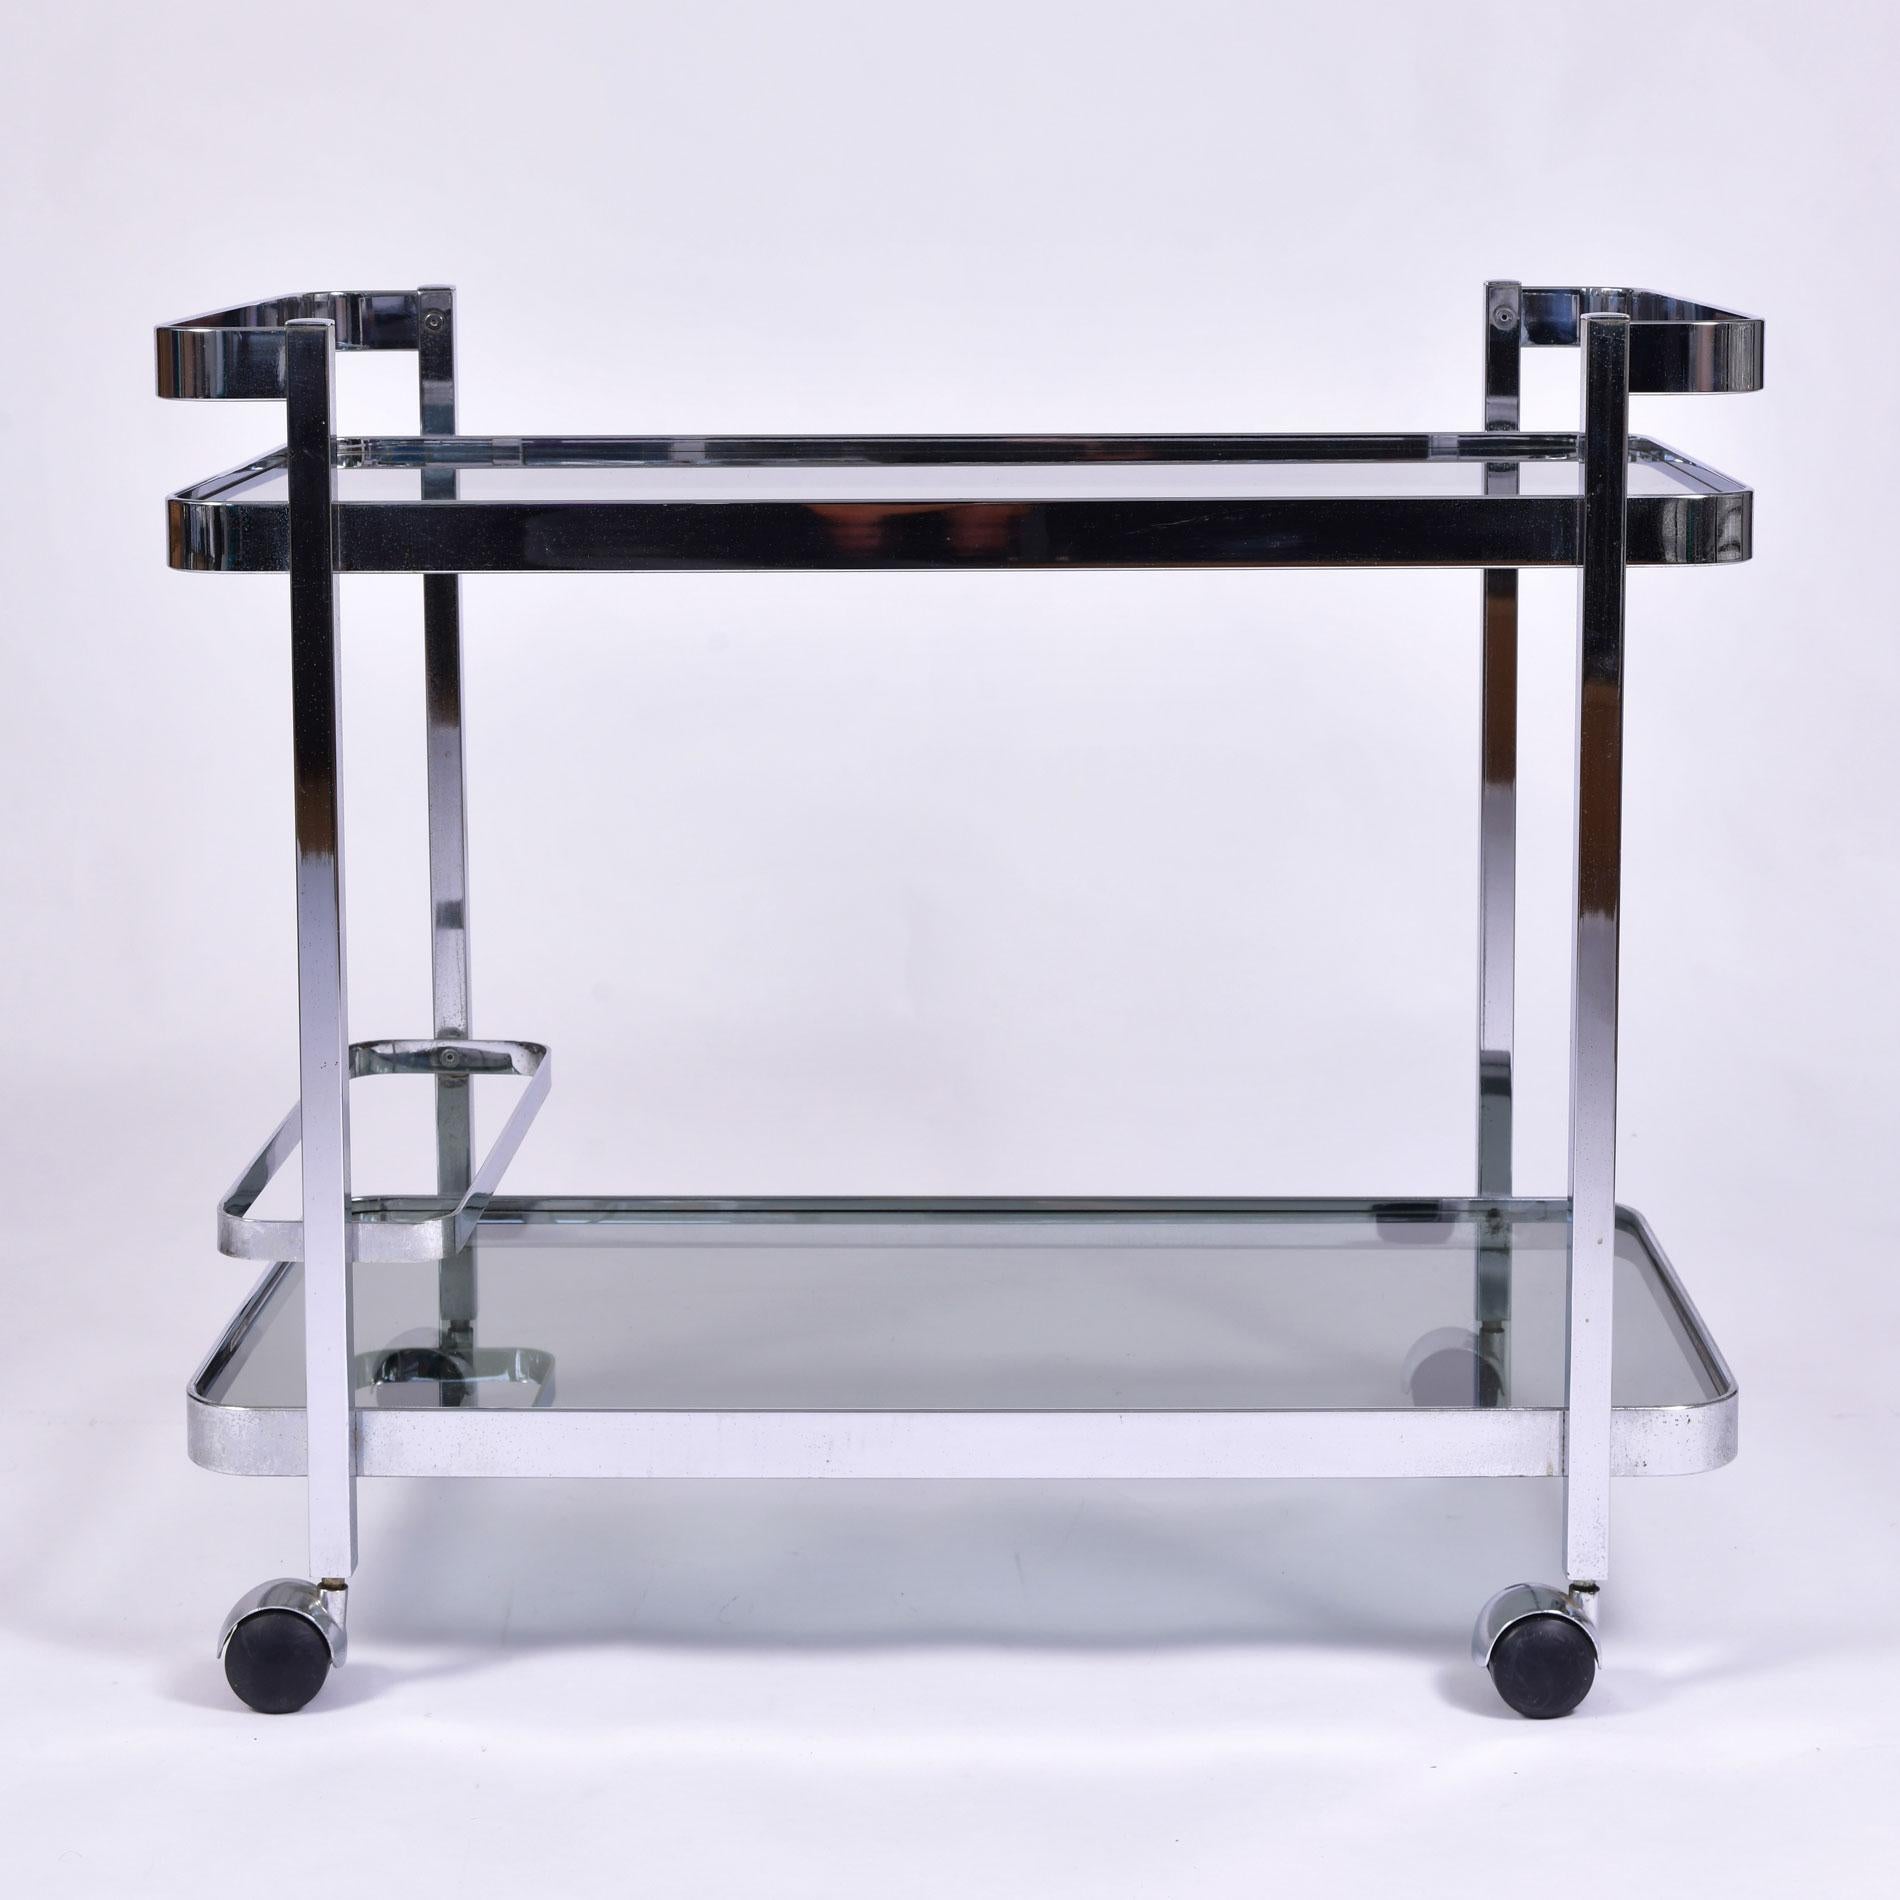 Chic chrome drinks trolley with two smokey glass shelves. Shelves are surrounded by simple curved chrome frame extending on the top shelf to create a handle at both ends. Bottle holder holds up to three bottles. Sits on chrome castor wheels for ease